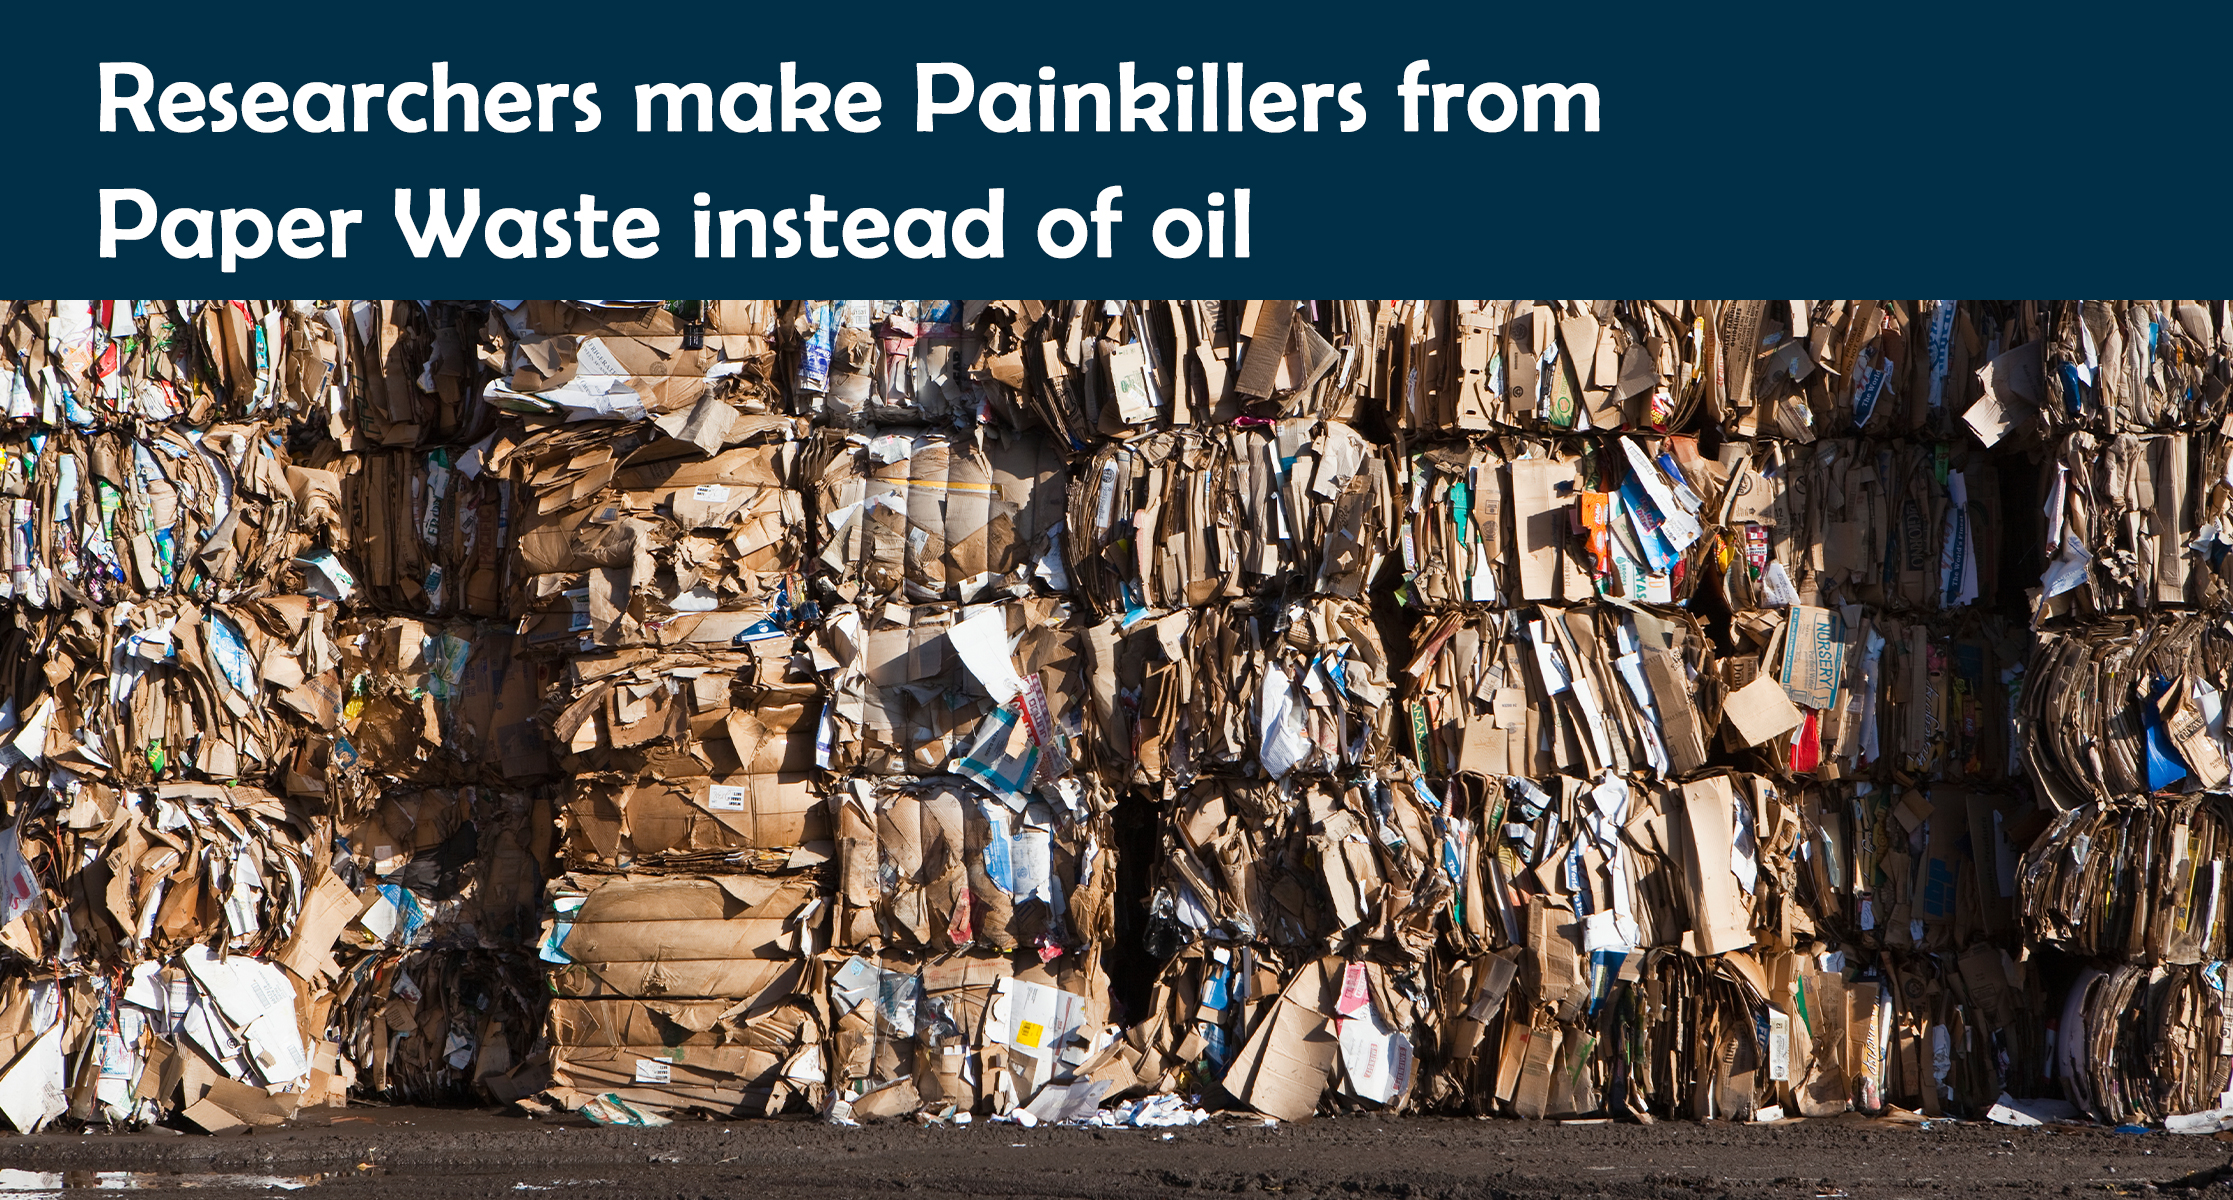 Researchers make Painkillers from Paper Waste instead of oil